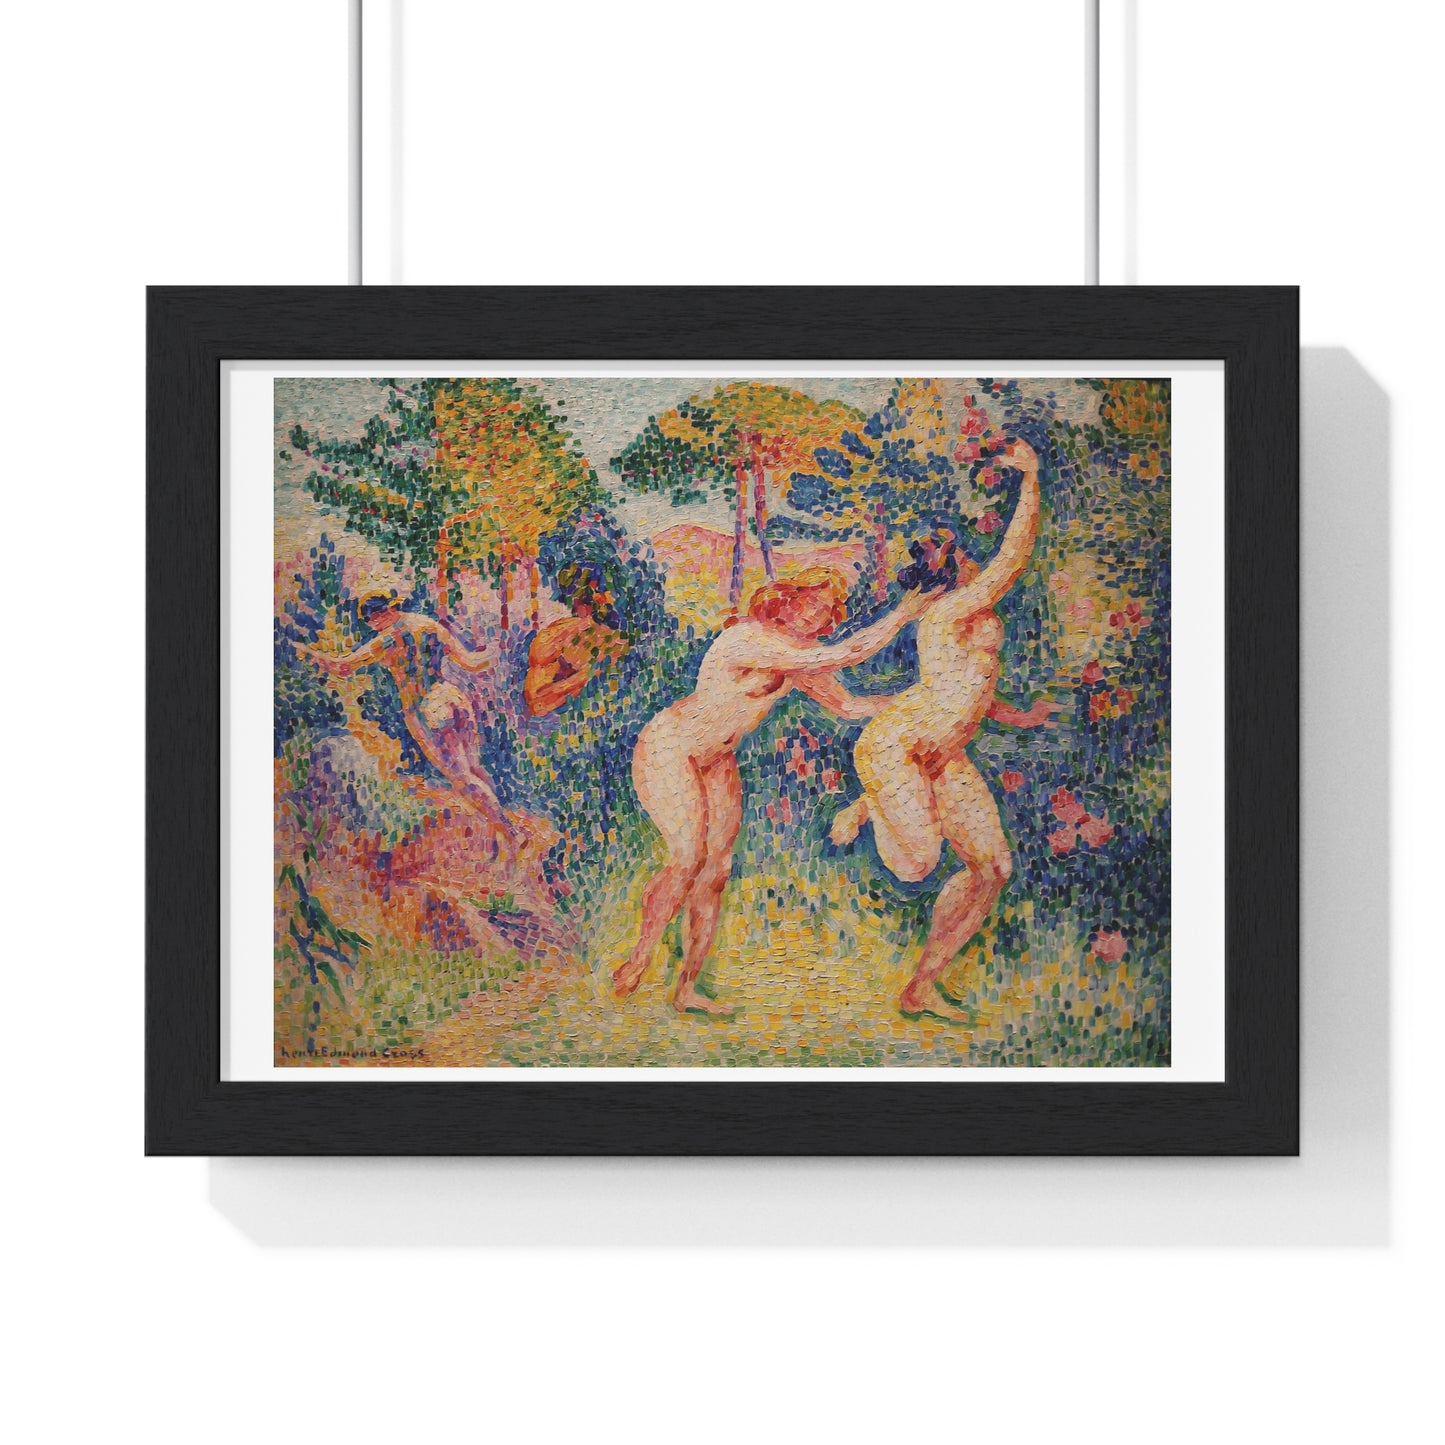 Two Running Nymphs 'La Fuite des Nymphes' (1906) by Henri-Edmond Cross, from the Original, Framed Art Print